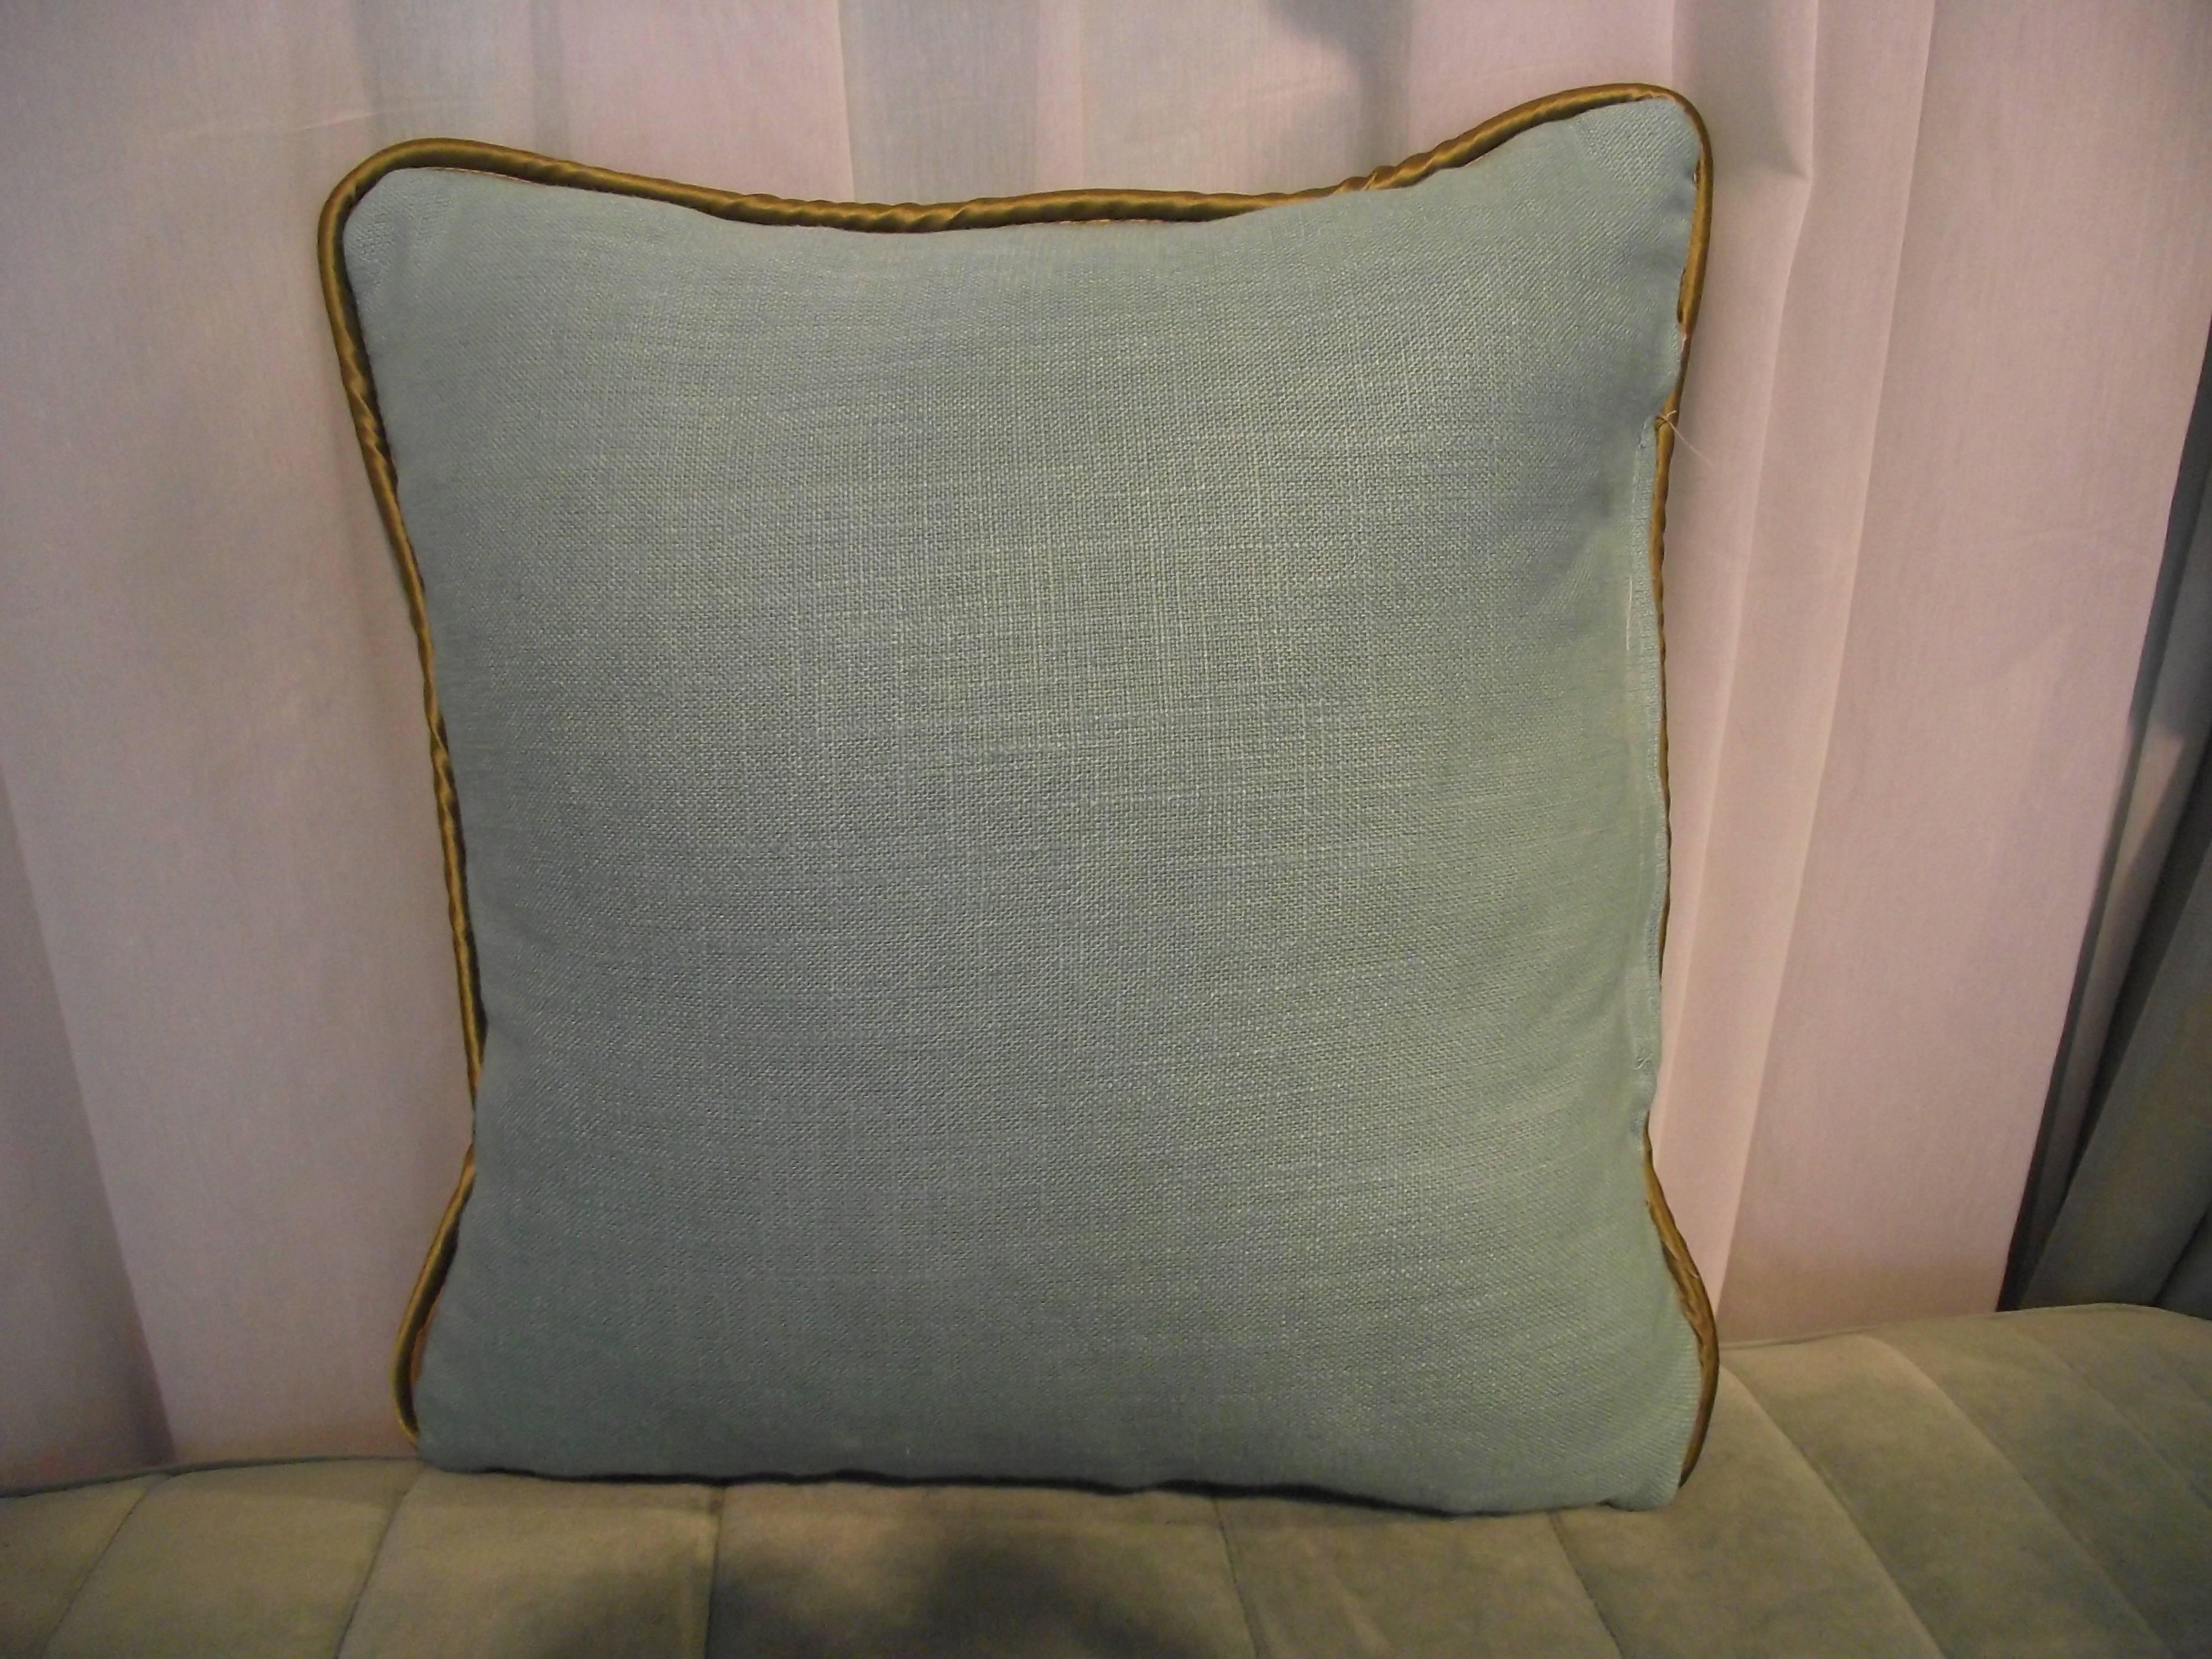 Another original design from Gantt Design Studio, this pillow brings together three colors of fabric and two textures.

The front cover is patterned with olive and light blue linen joined with soft blue velvet.

This unusual throw pillow is a